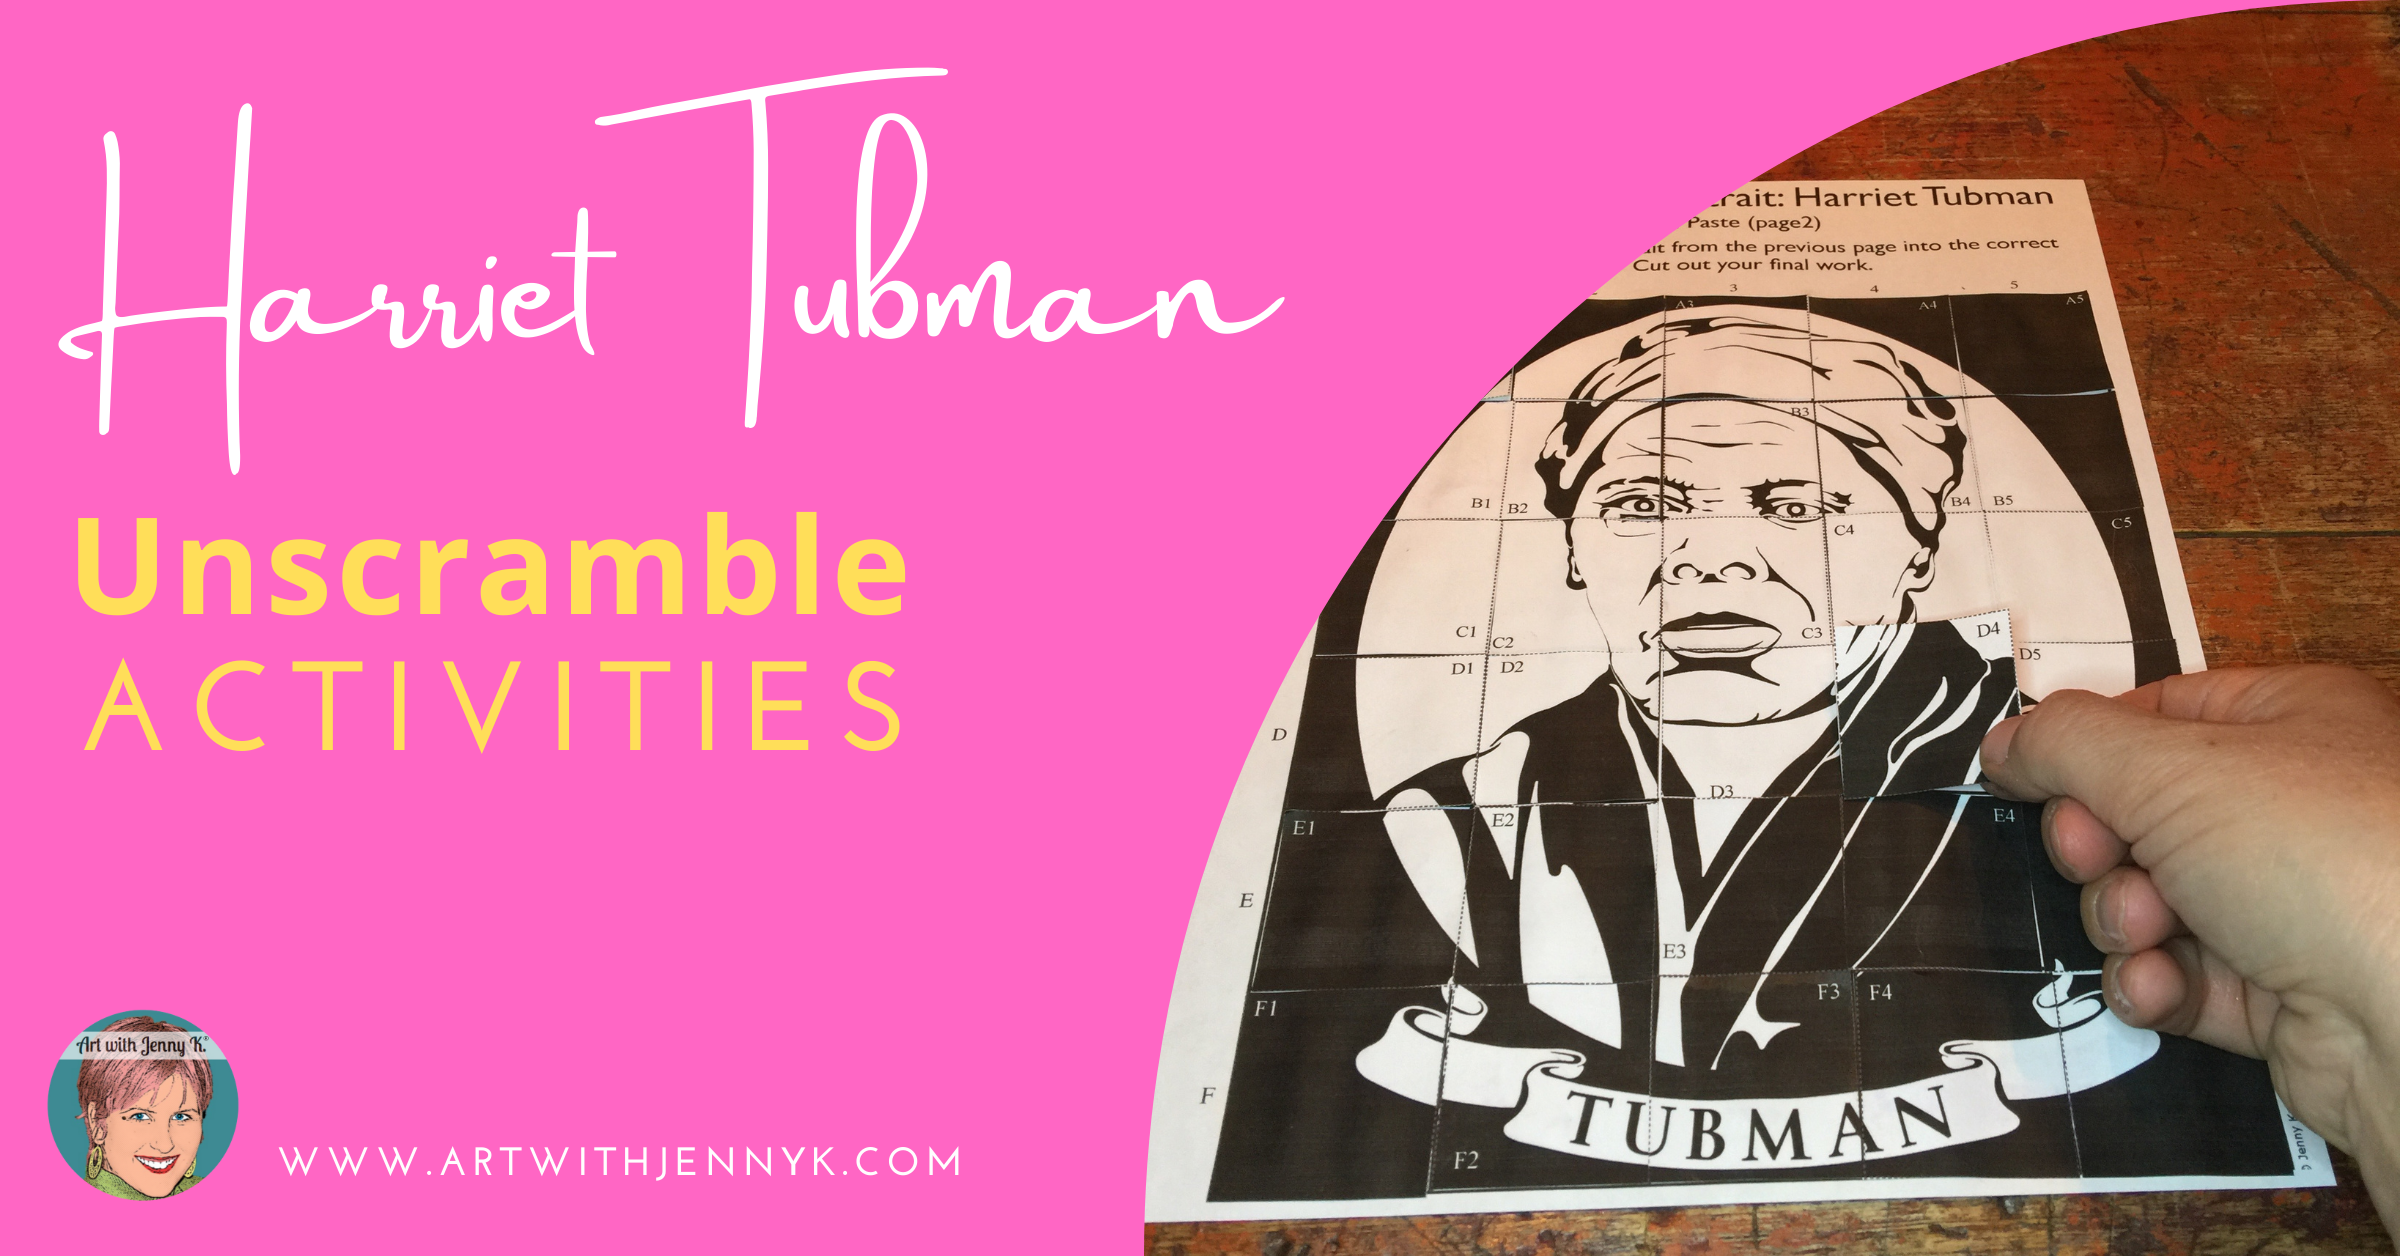 Harriet Tubman Activities for Teachers and Students from Art with Jenny K.